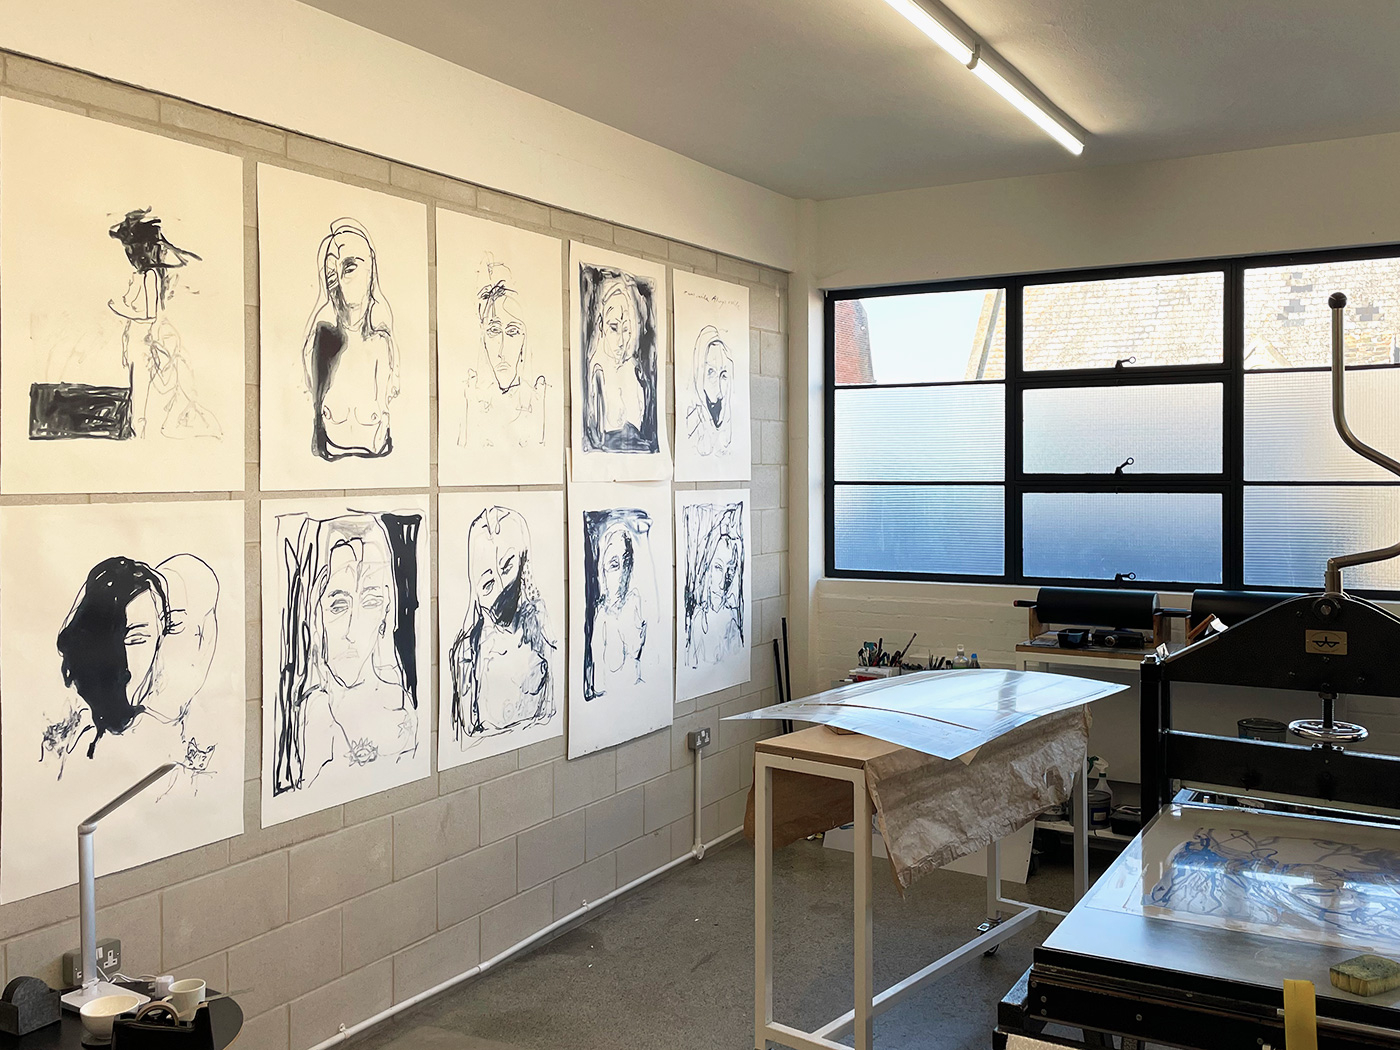 The ten portrait are proofed in Counter Studio, Margate (2021)